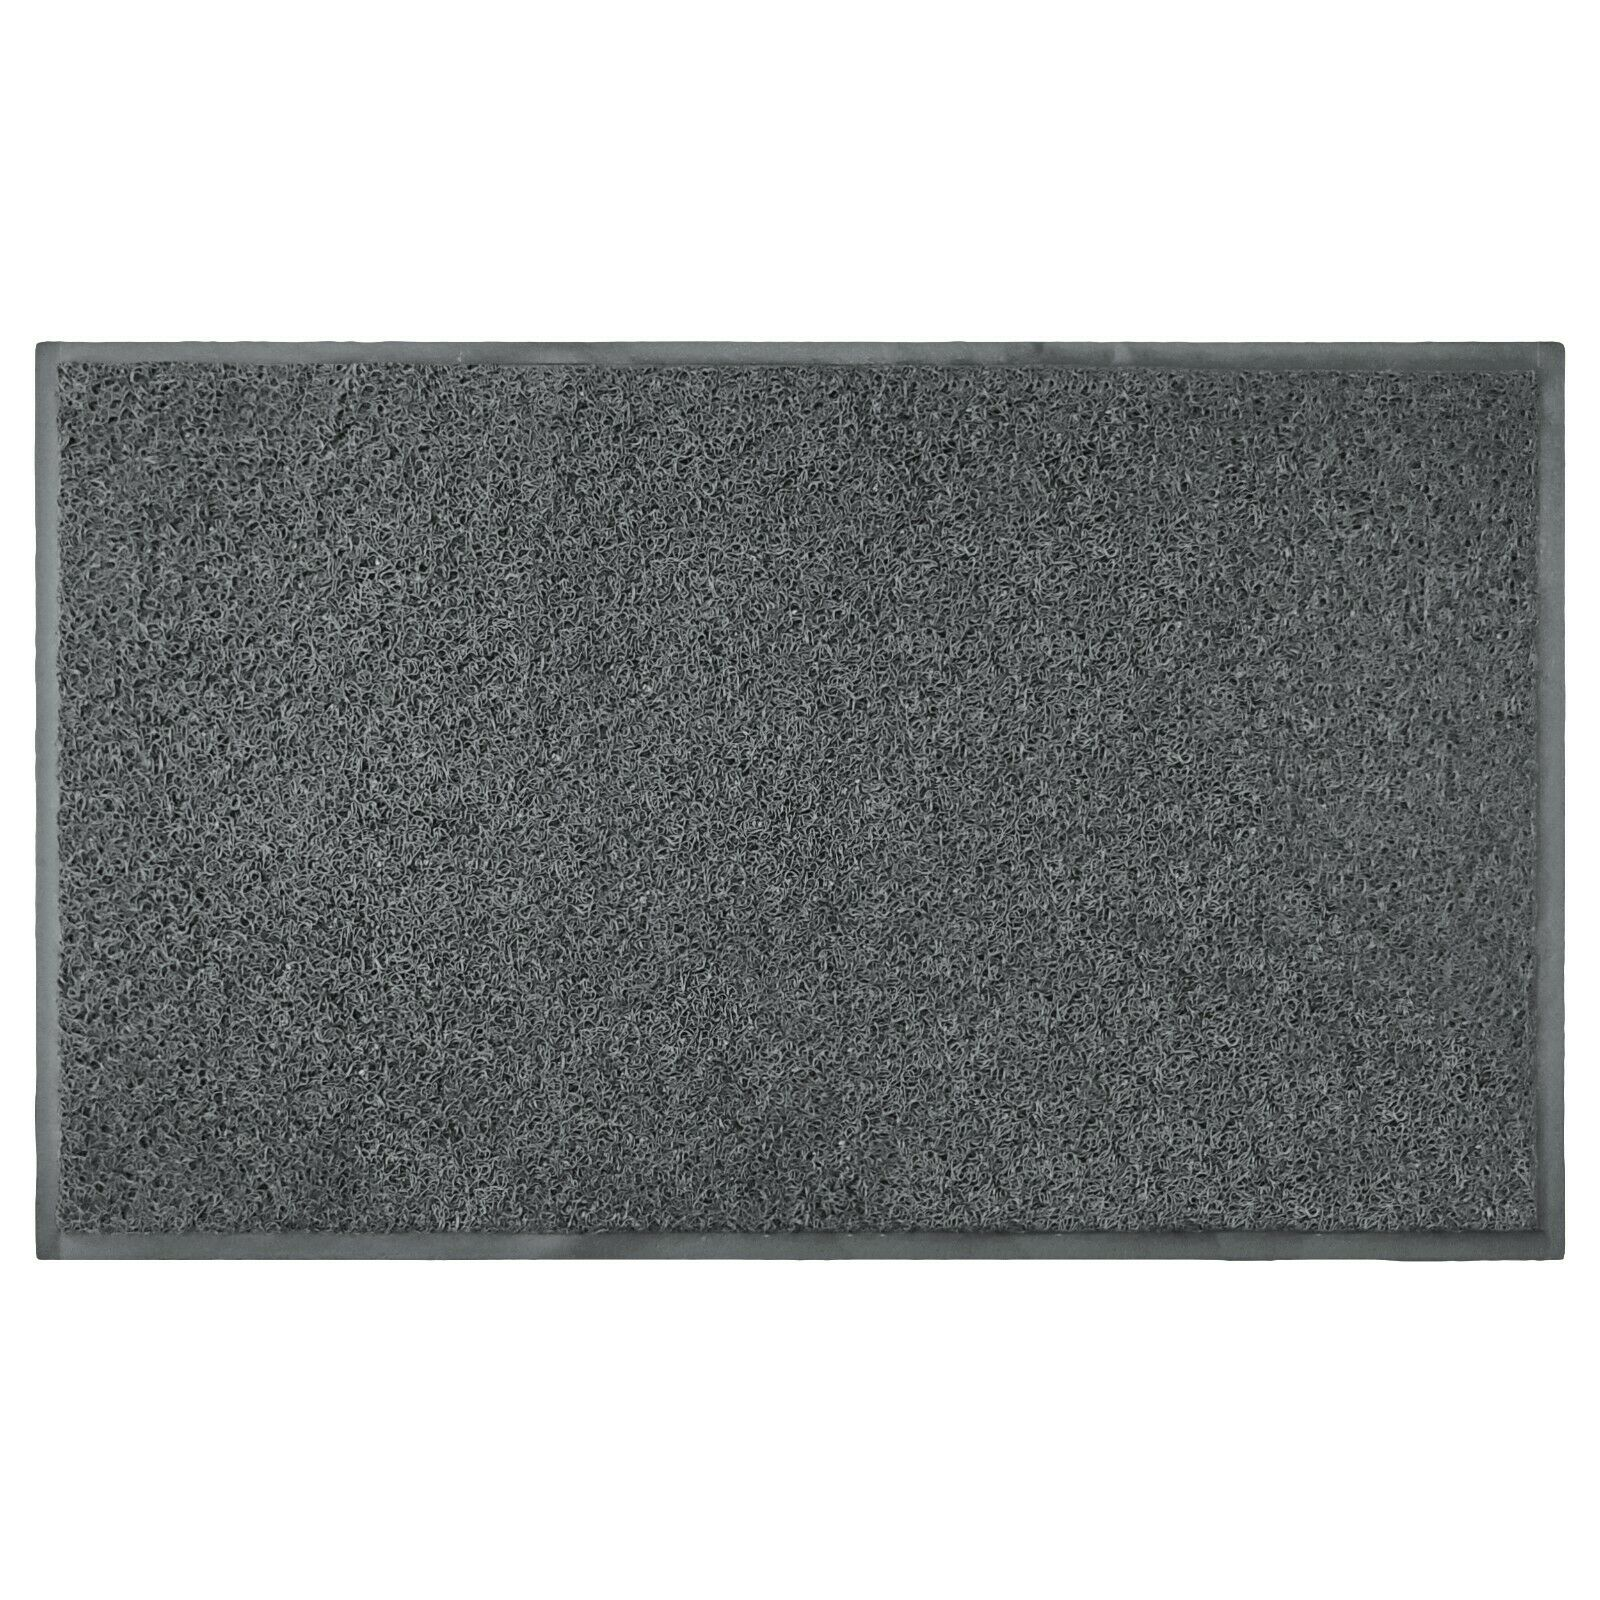 3M Commercial LARGE Sized Nomad Mat With EDGING 48" X 72" (120CM X 183CM) GREY